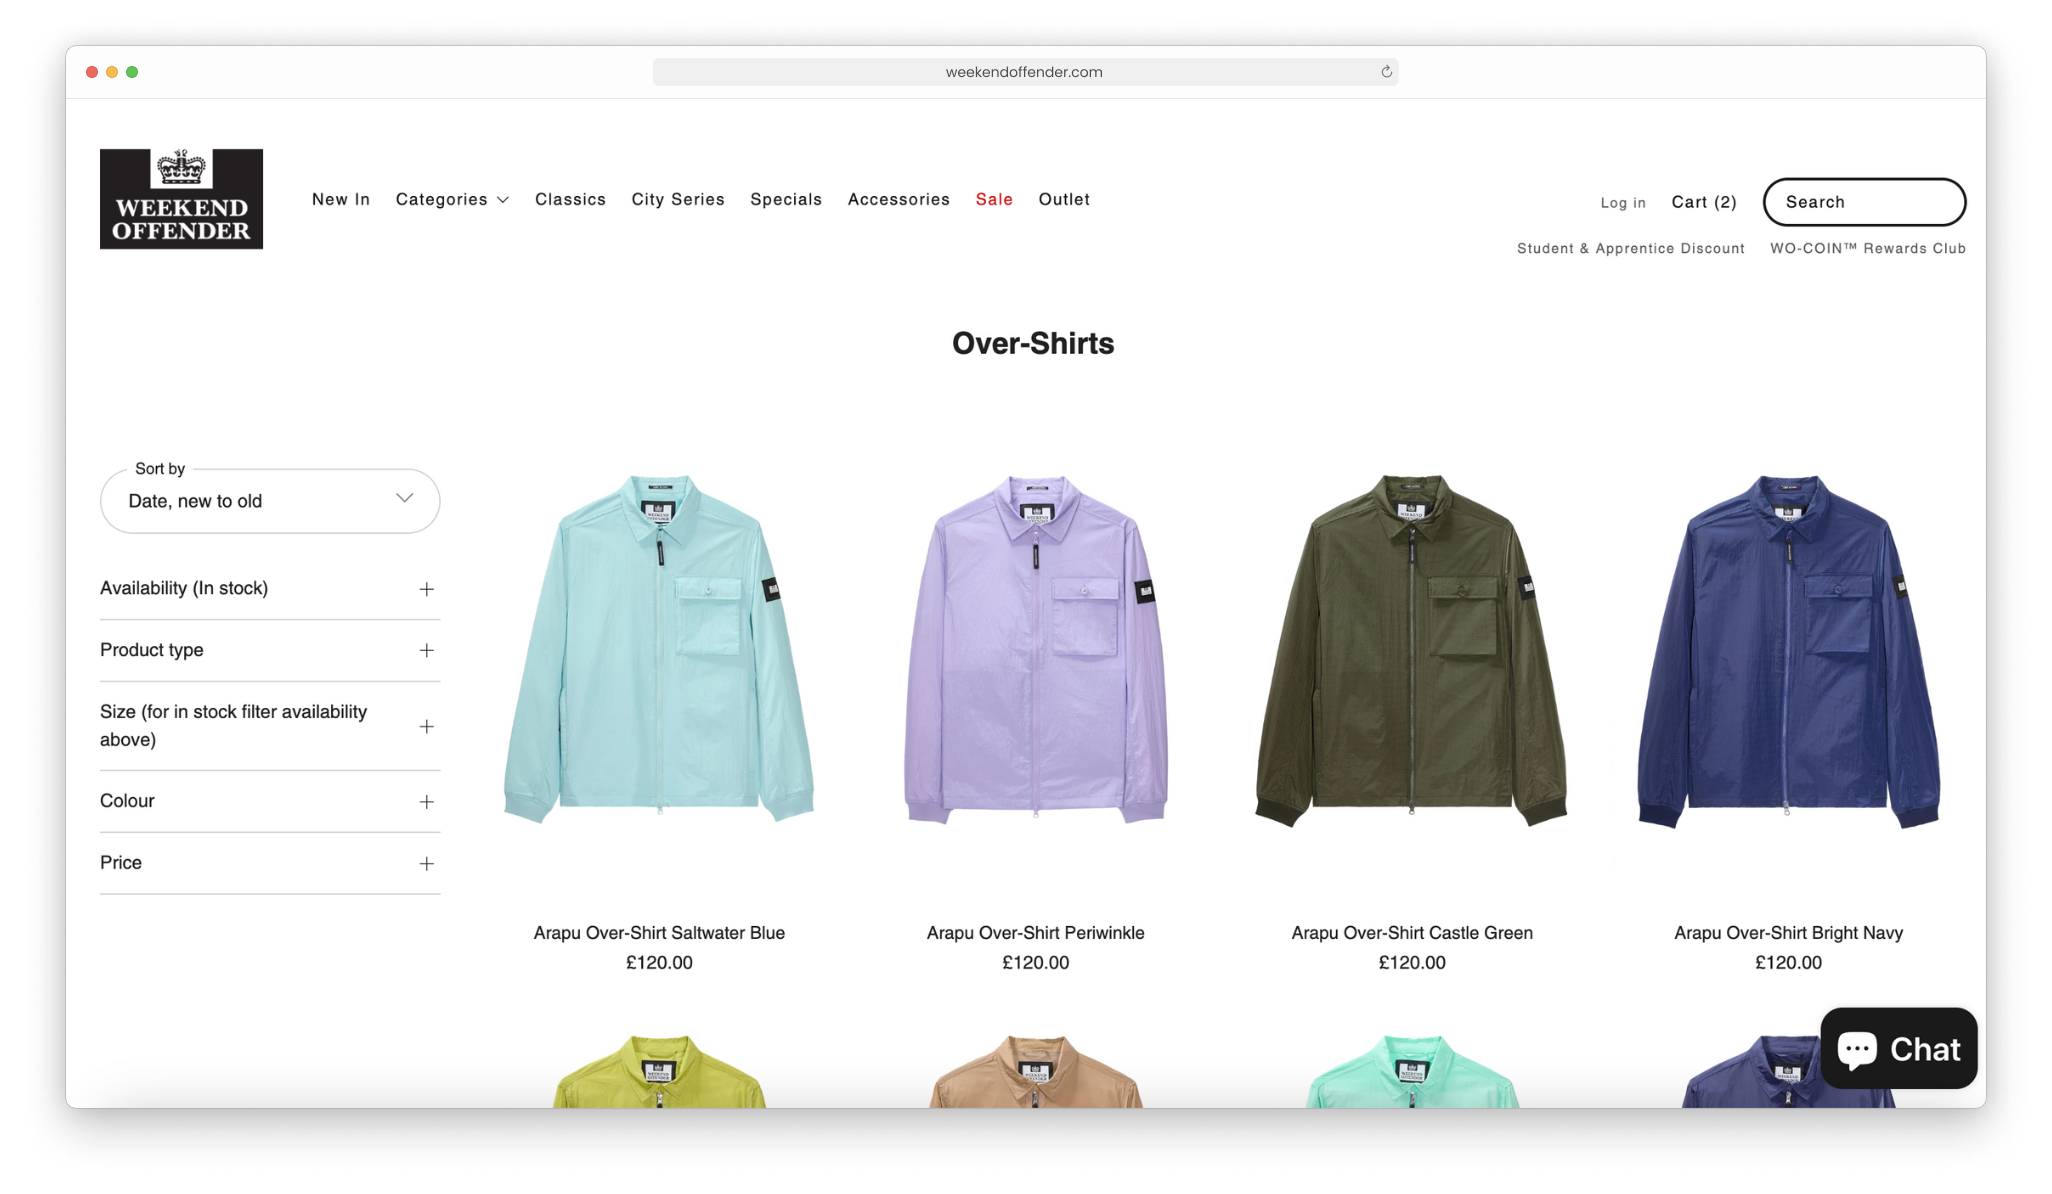 Weekend Offender, a successful global retailer, showing their product category pages after having approached eCommerce development agency, magic42, for the go-live of a new ERP system and connections to Prima Software from Shopify Plus.